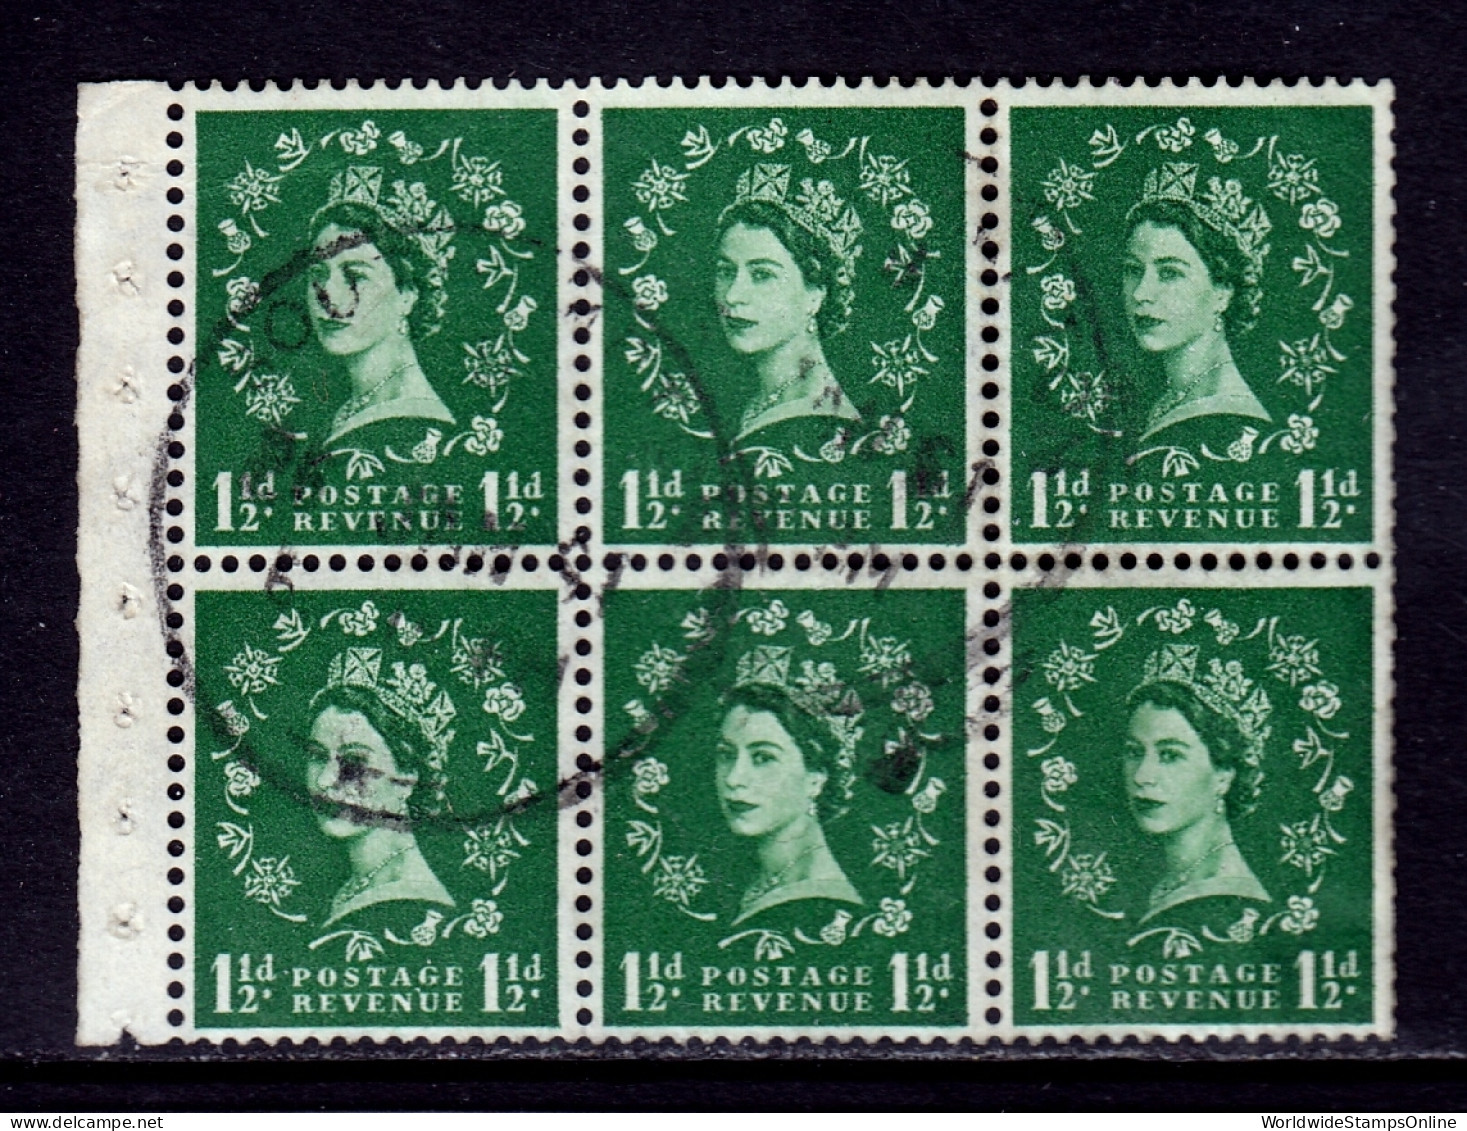 Great Britain - SG #572Wi - Used - Inverted Wmk., Full Booklet Pane - SG £7.50+ - Used Stamps